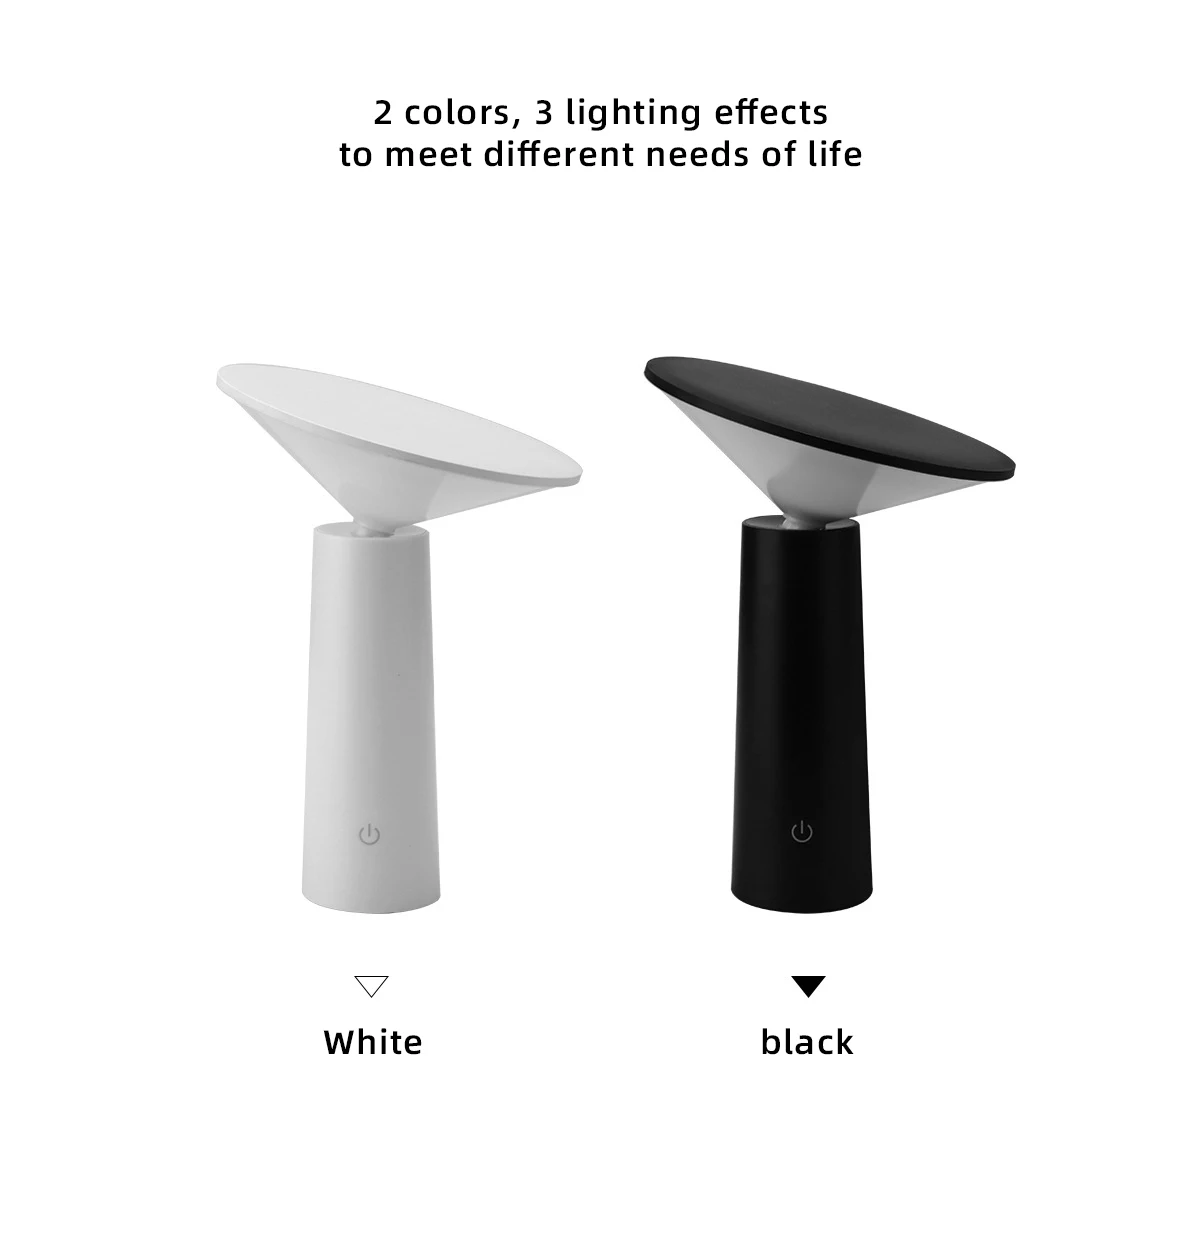 Coffee Table Hotel Bedside Home Decor Lighting Desk Lamp Luxury Post Modern Rechargeable Battery Wireless Charging Led Desk Lamp